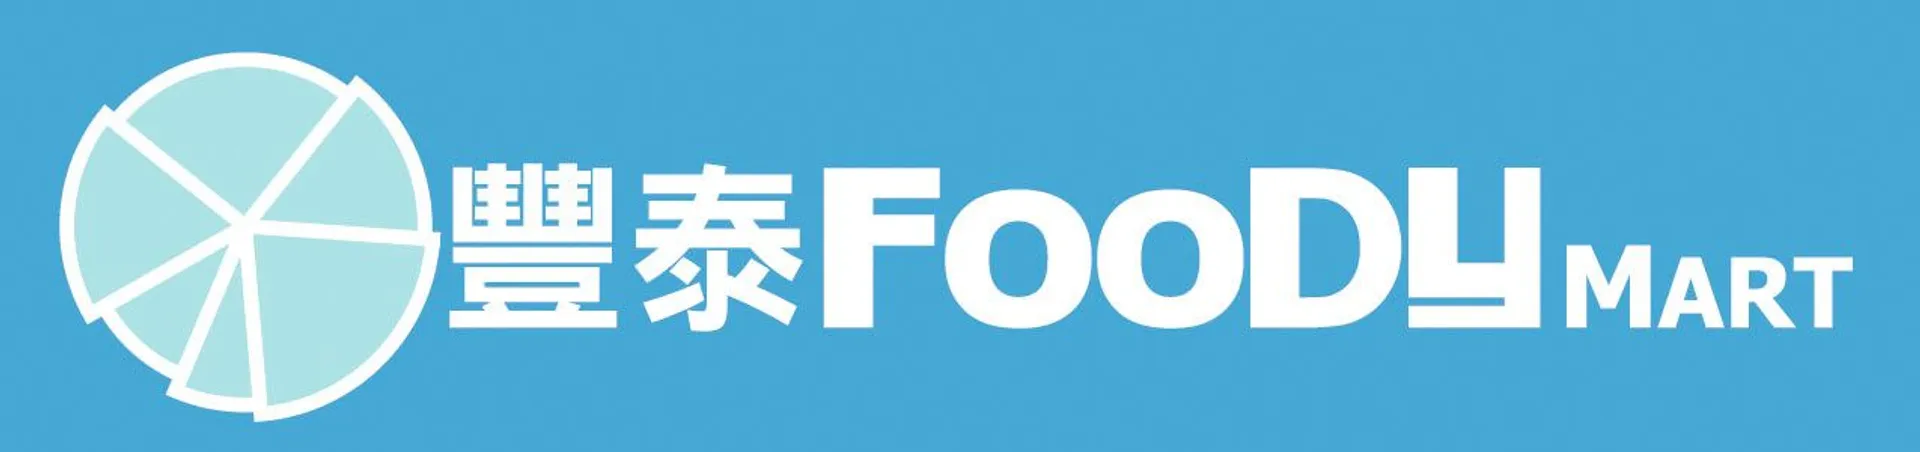 FOODY MART logo. Current weekly ad